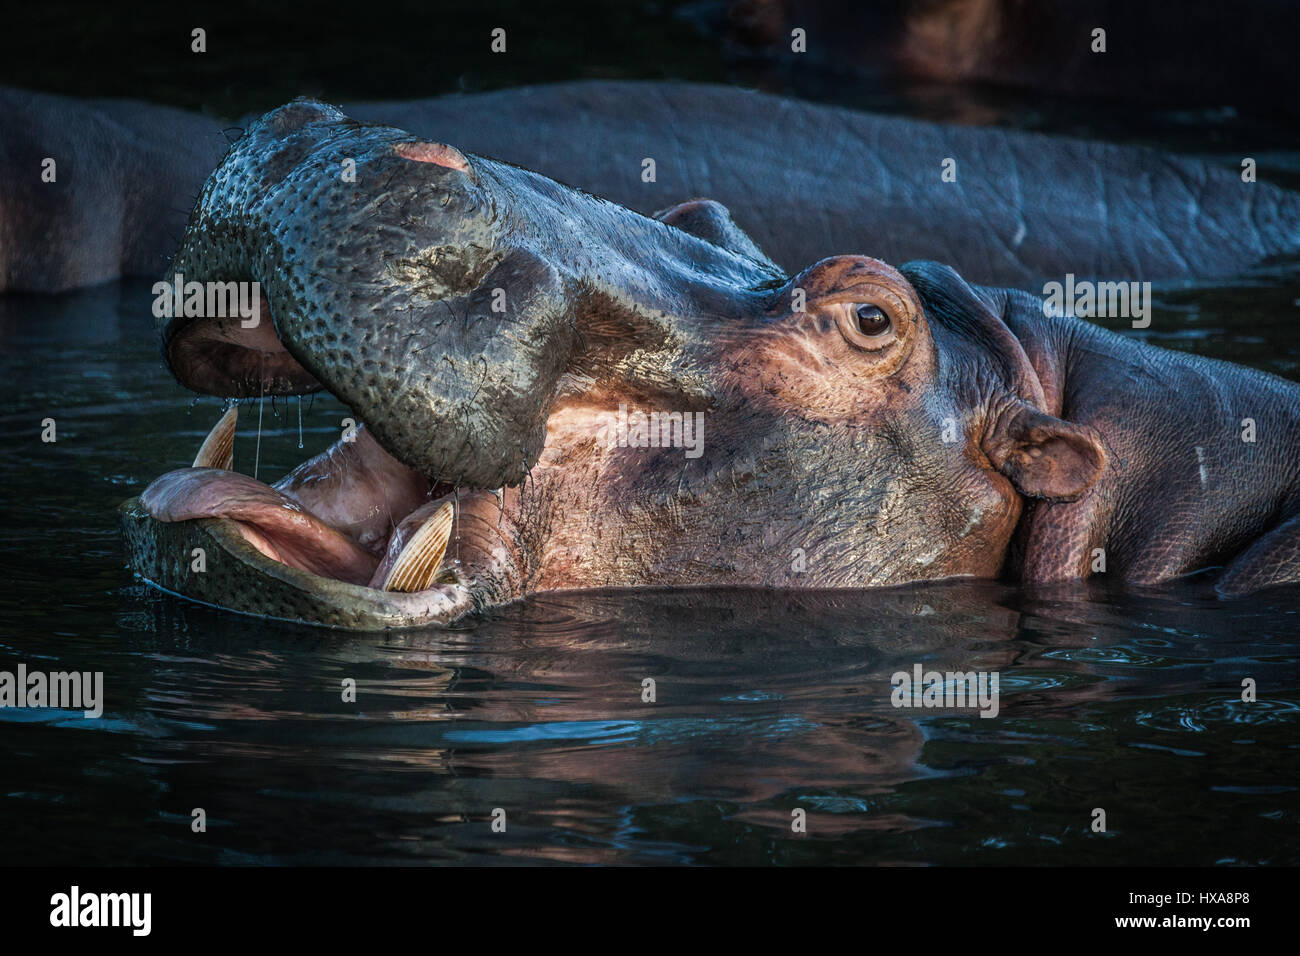 Hippo yawning giving a view of his massive teeth. Stock Photo